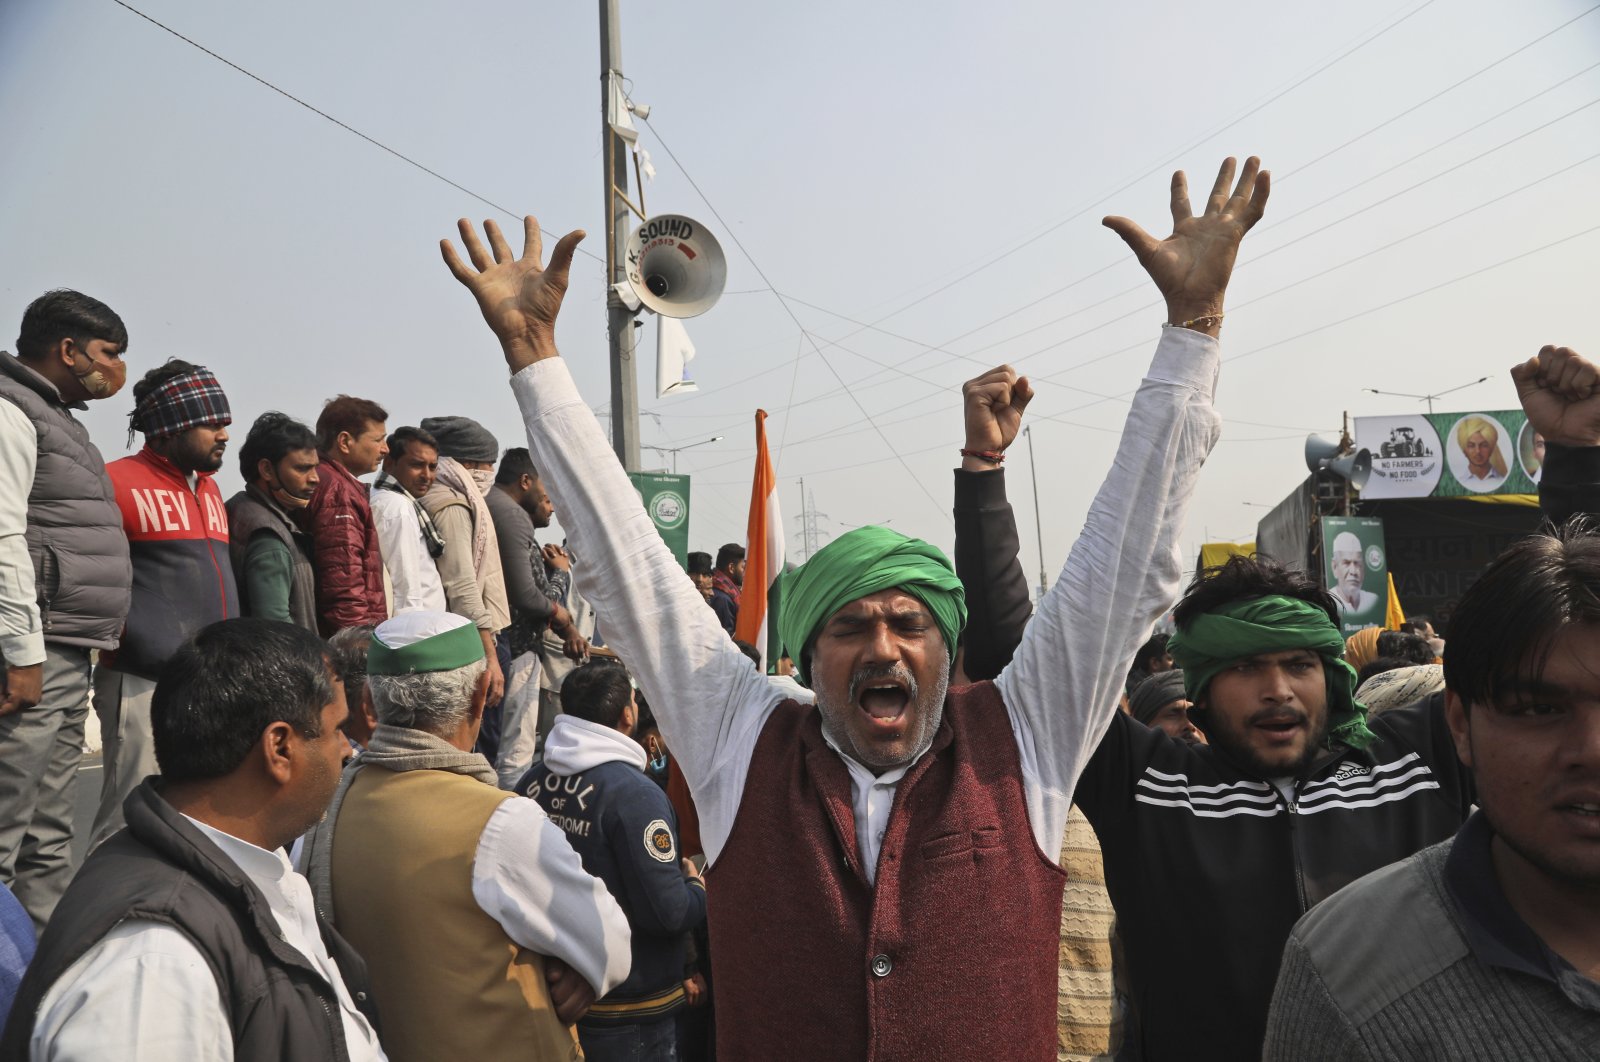 Farmers shout slogans as they arrive at the site of ongoing protests against farm laws at the Delhi-Uttar Pradesh border, on the outskirts of New Delhi, India, Friday, Jan. 29, 2021. (AP Photo)